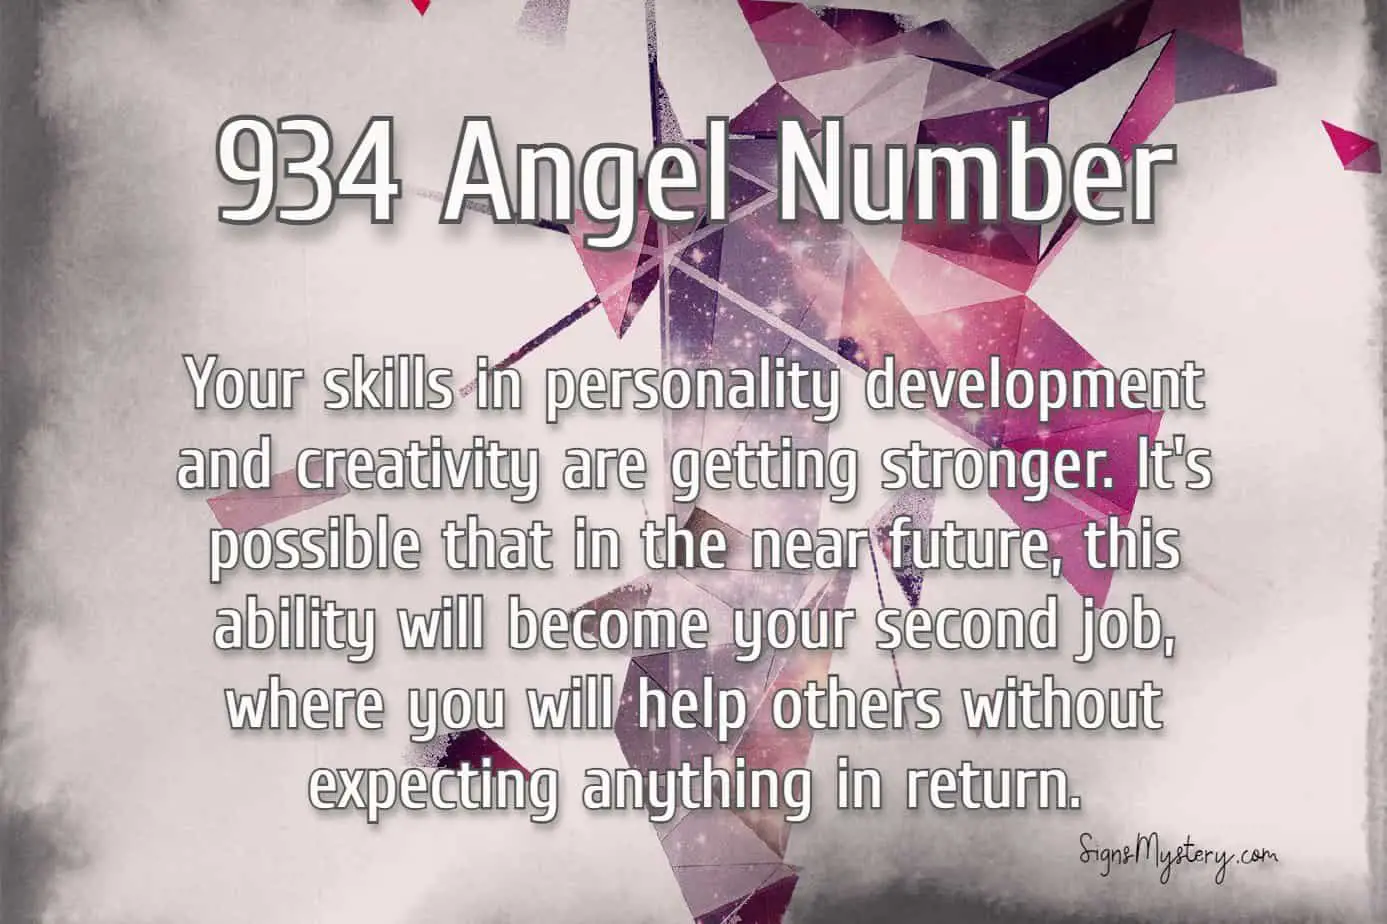 angel number 934 meaning